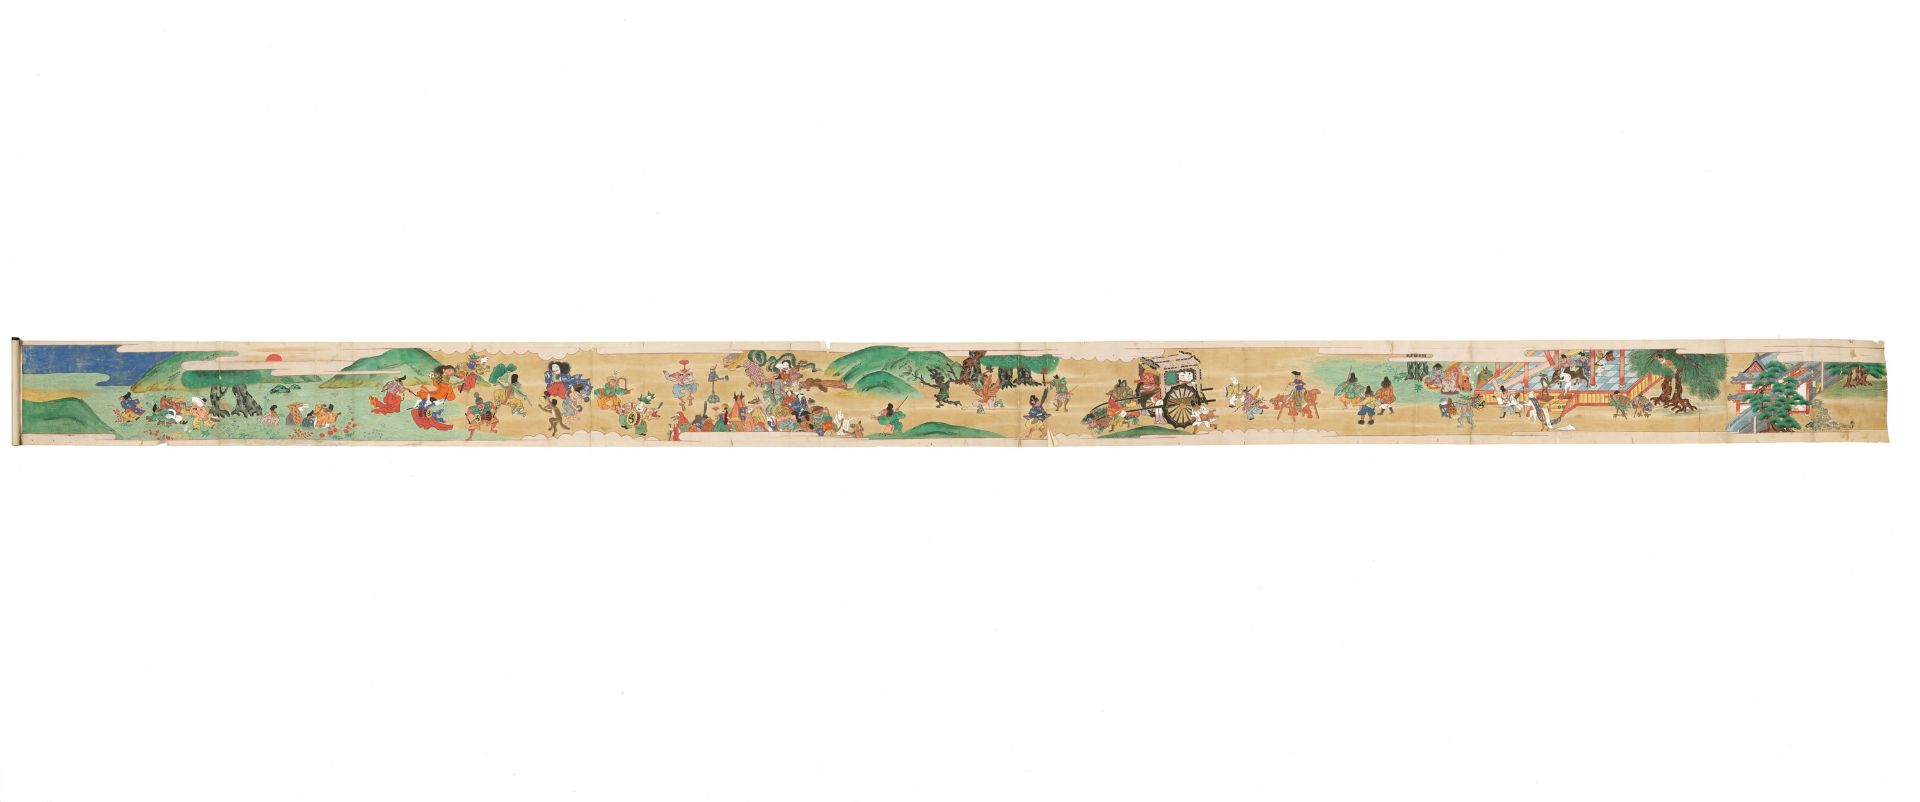 AN EMAKI HANDSCROLL DEPICTING THE NOCTURNAL PROCESSION OF THE HUNDRED DEMONS, HYAKKI YAGYO - Image 2 of 9